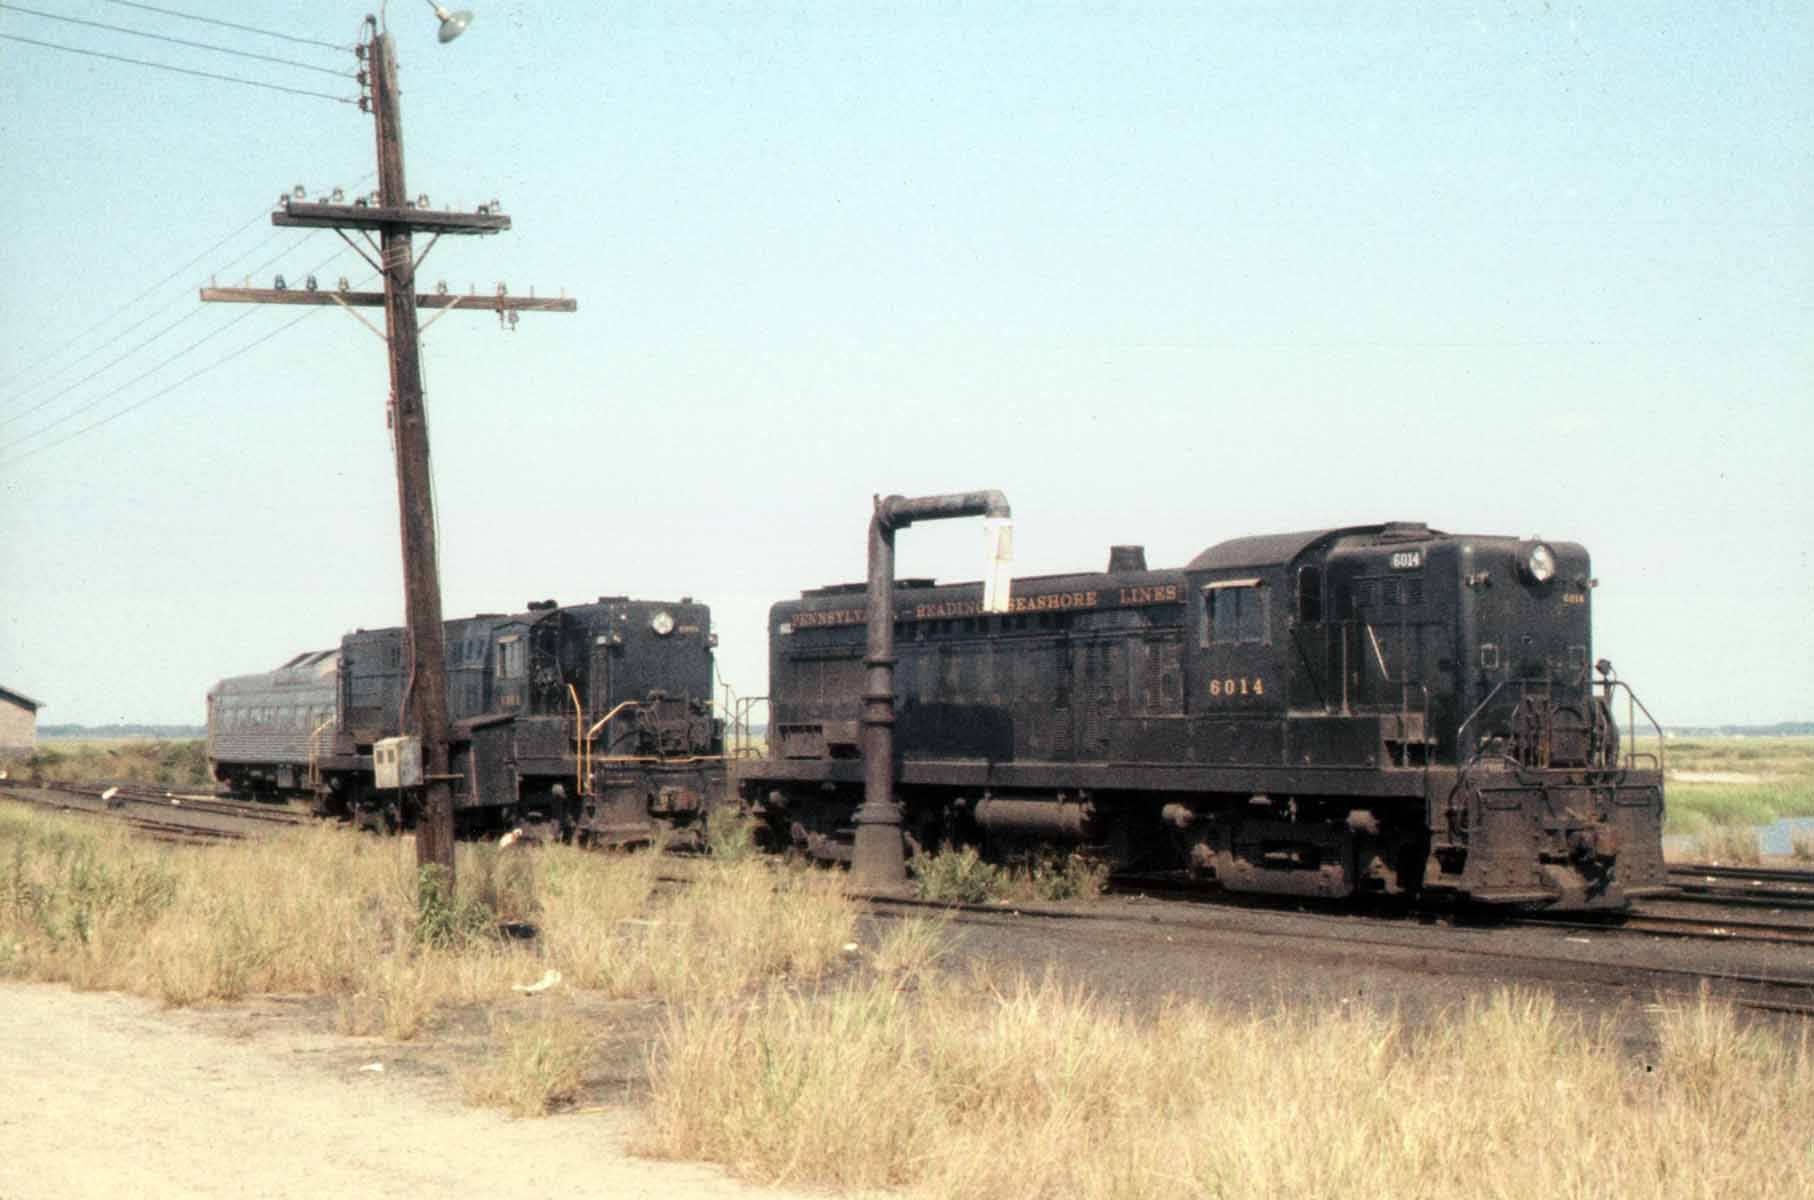 Two (full-size) AS616 locomotives in a siding at the Cold Spring yard in Wildwood Crest, NJ - Circa 1956